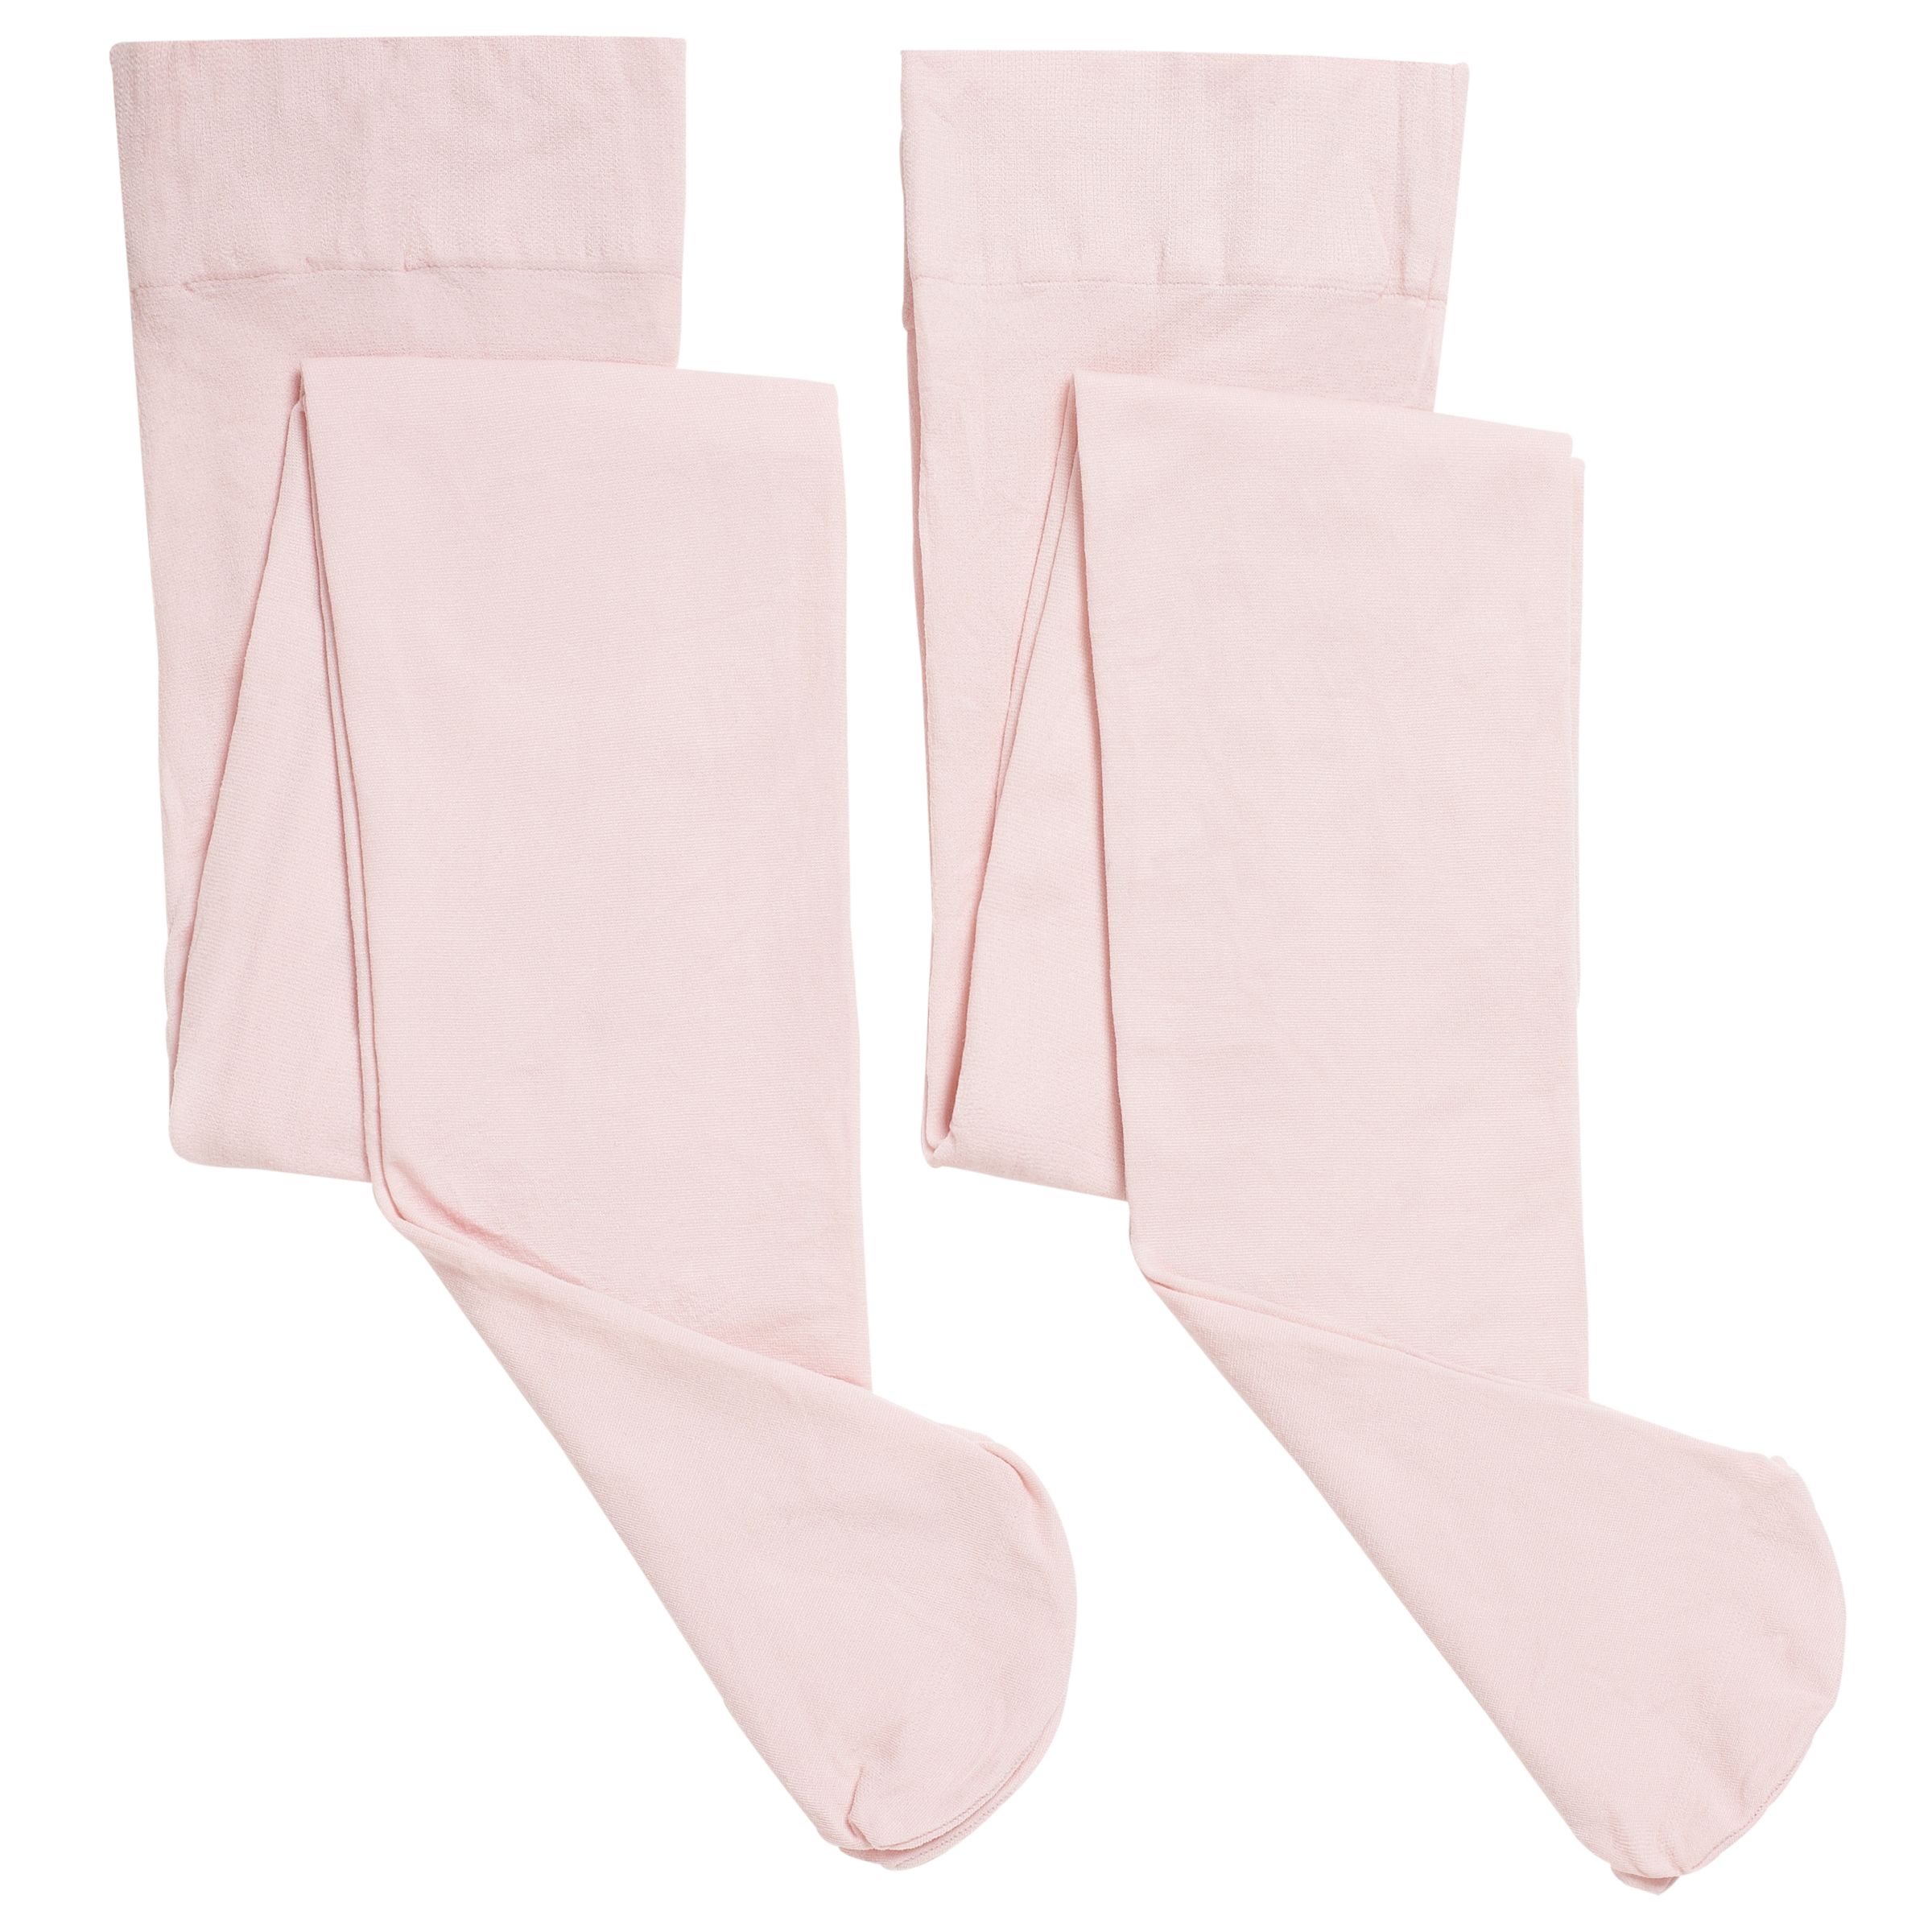 John Lewis ANYDAY Kids' Opaque Tights, Pack of 2, Pink, 11-12 Years